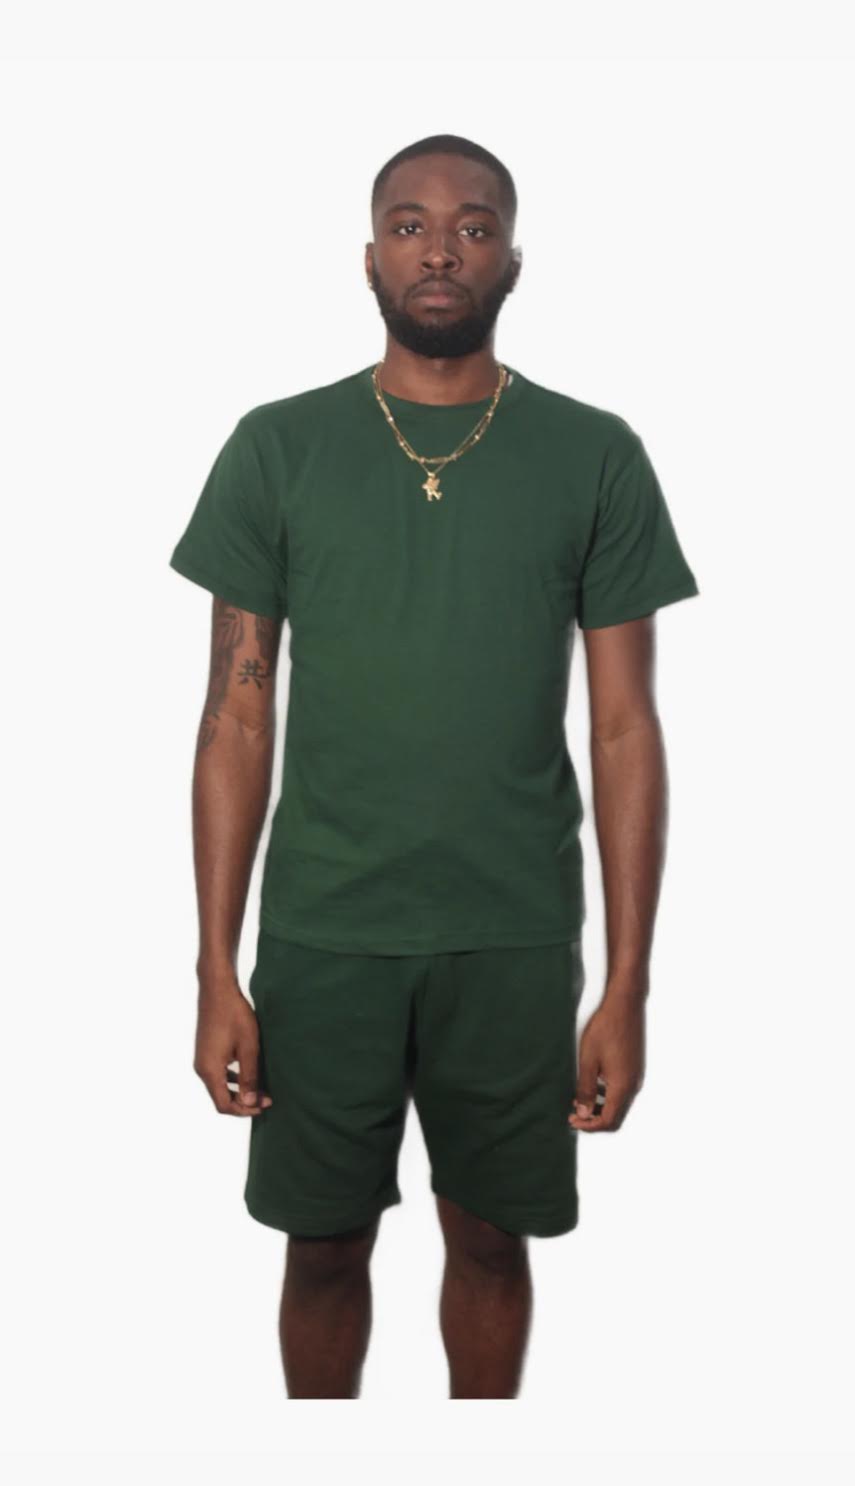 Forest green t-shirt and short sets